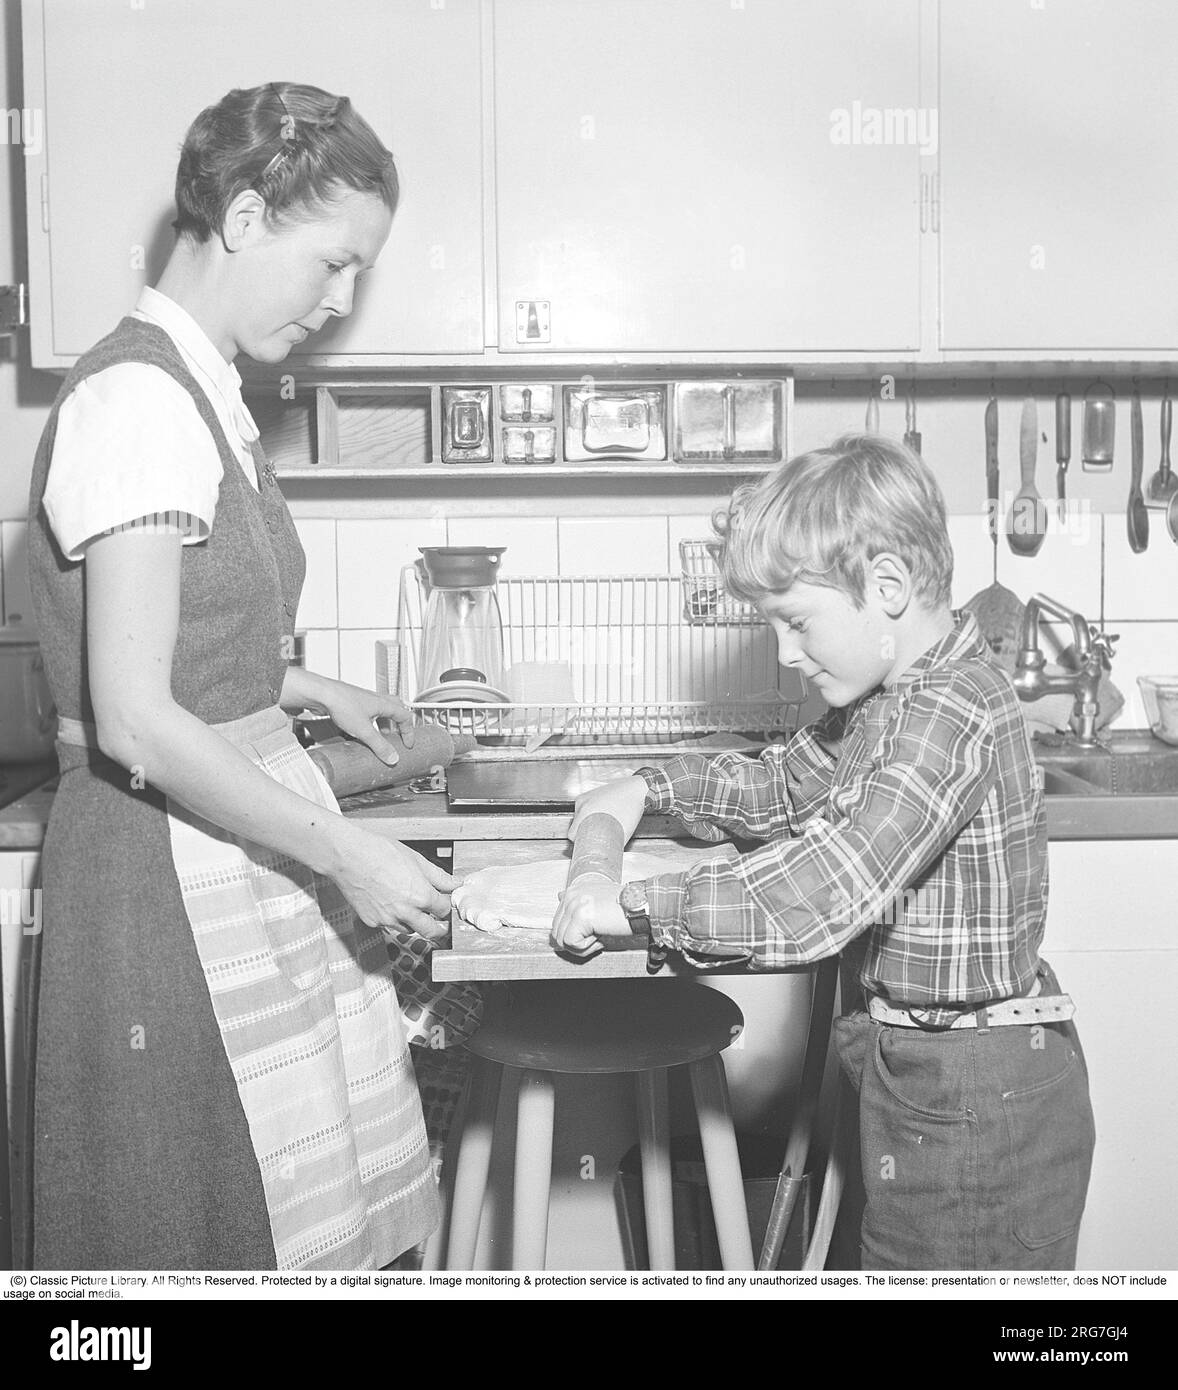 https://c8.alamy.com/comp/2RG7GJ4/baking-in-the-1950s-a-mother-with-her-son-in-the-kitchen-he-helps-her-with-the-baking-rolling-the-dough-on-an-extendable-bench-board-sweden-1958-kristoffersson-ref-by18-11-2RG7GJ4.jpg